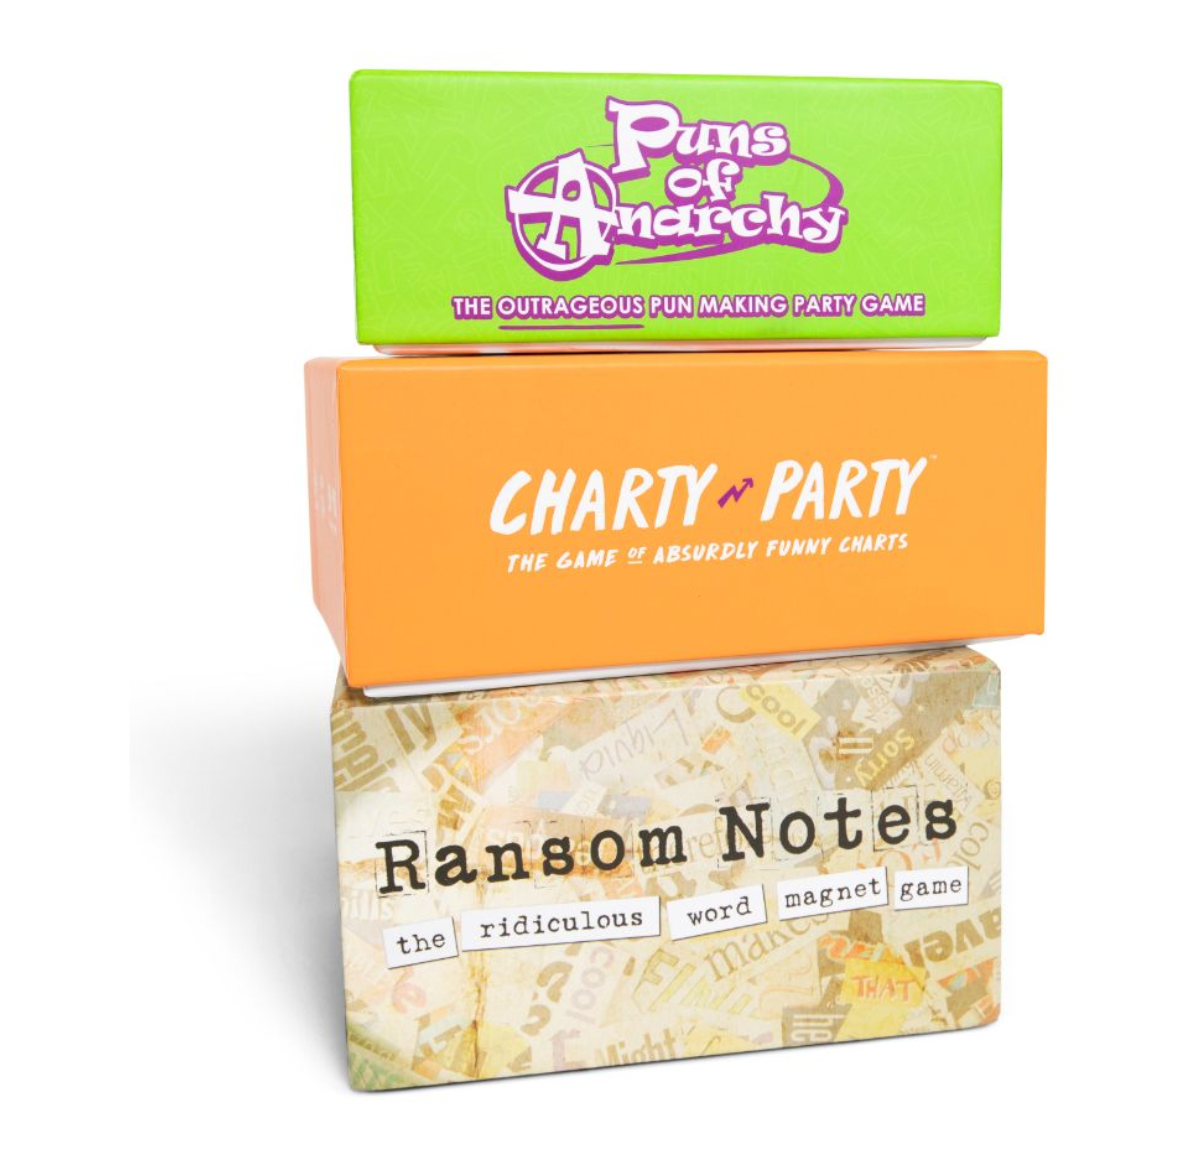 Big Three Bundle: Ransom Notes, Puns of Anarchy, and Charty Party